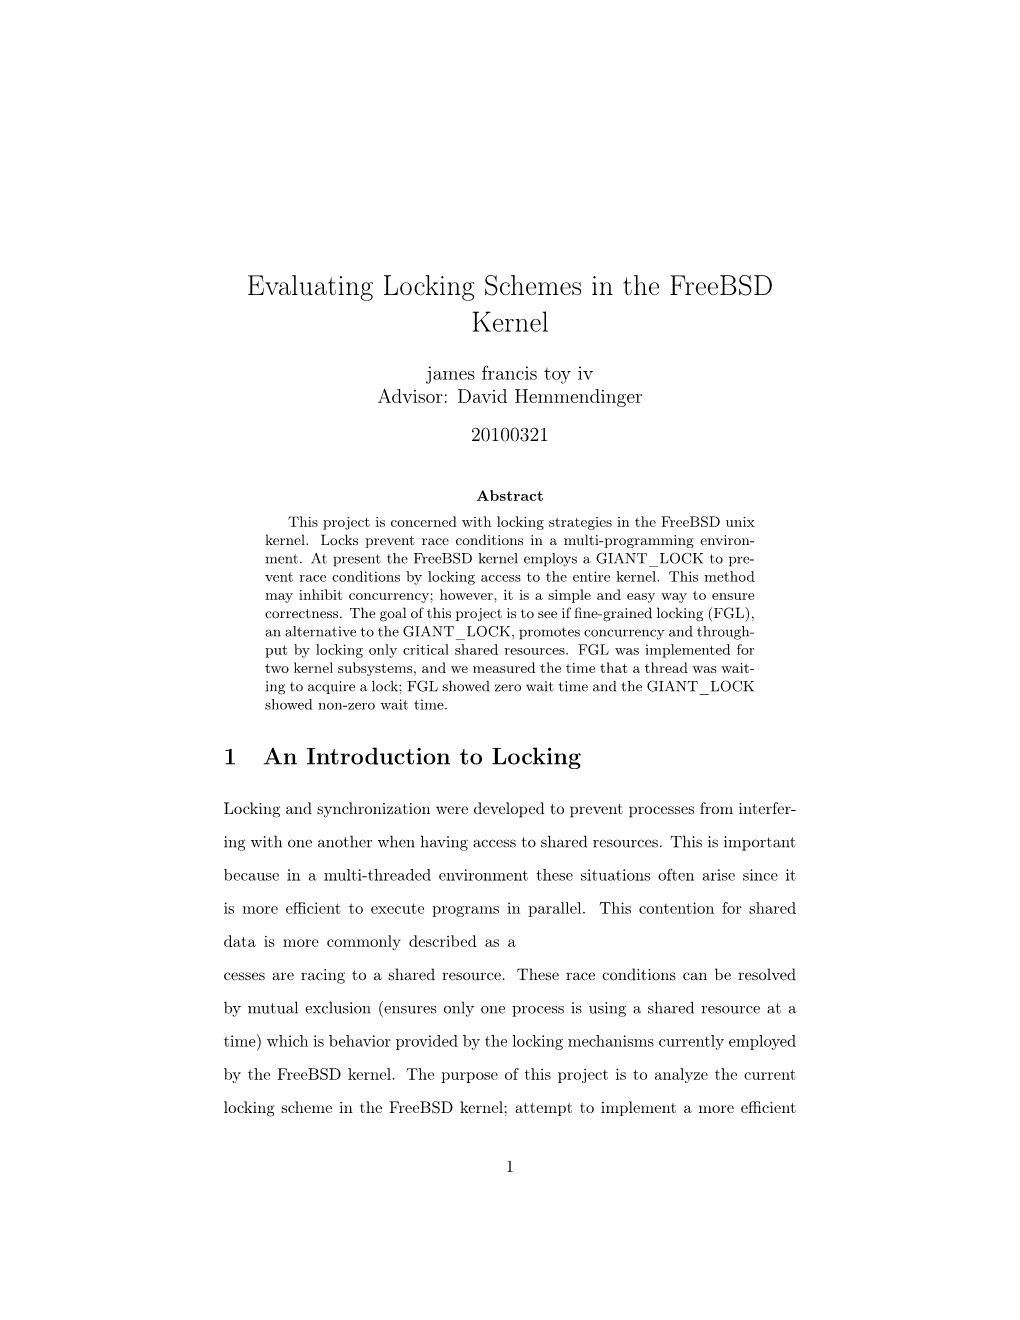 Evaluating Locking Schemes in the Freebsd Kernel